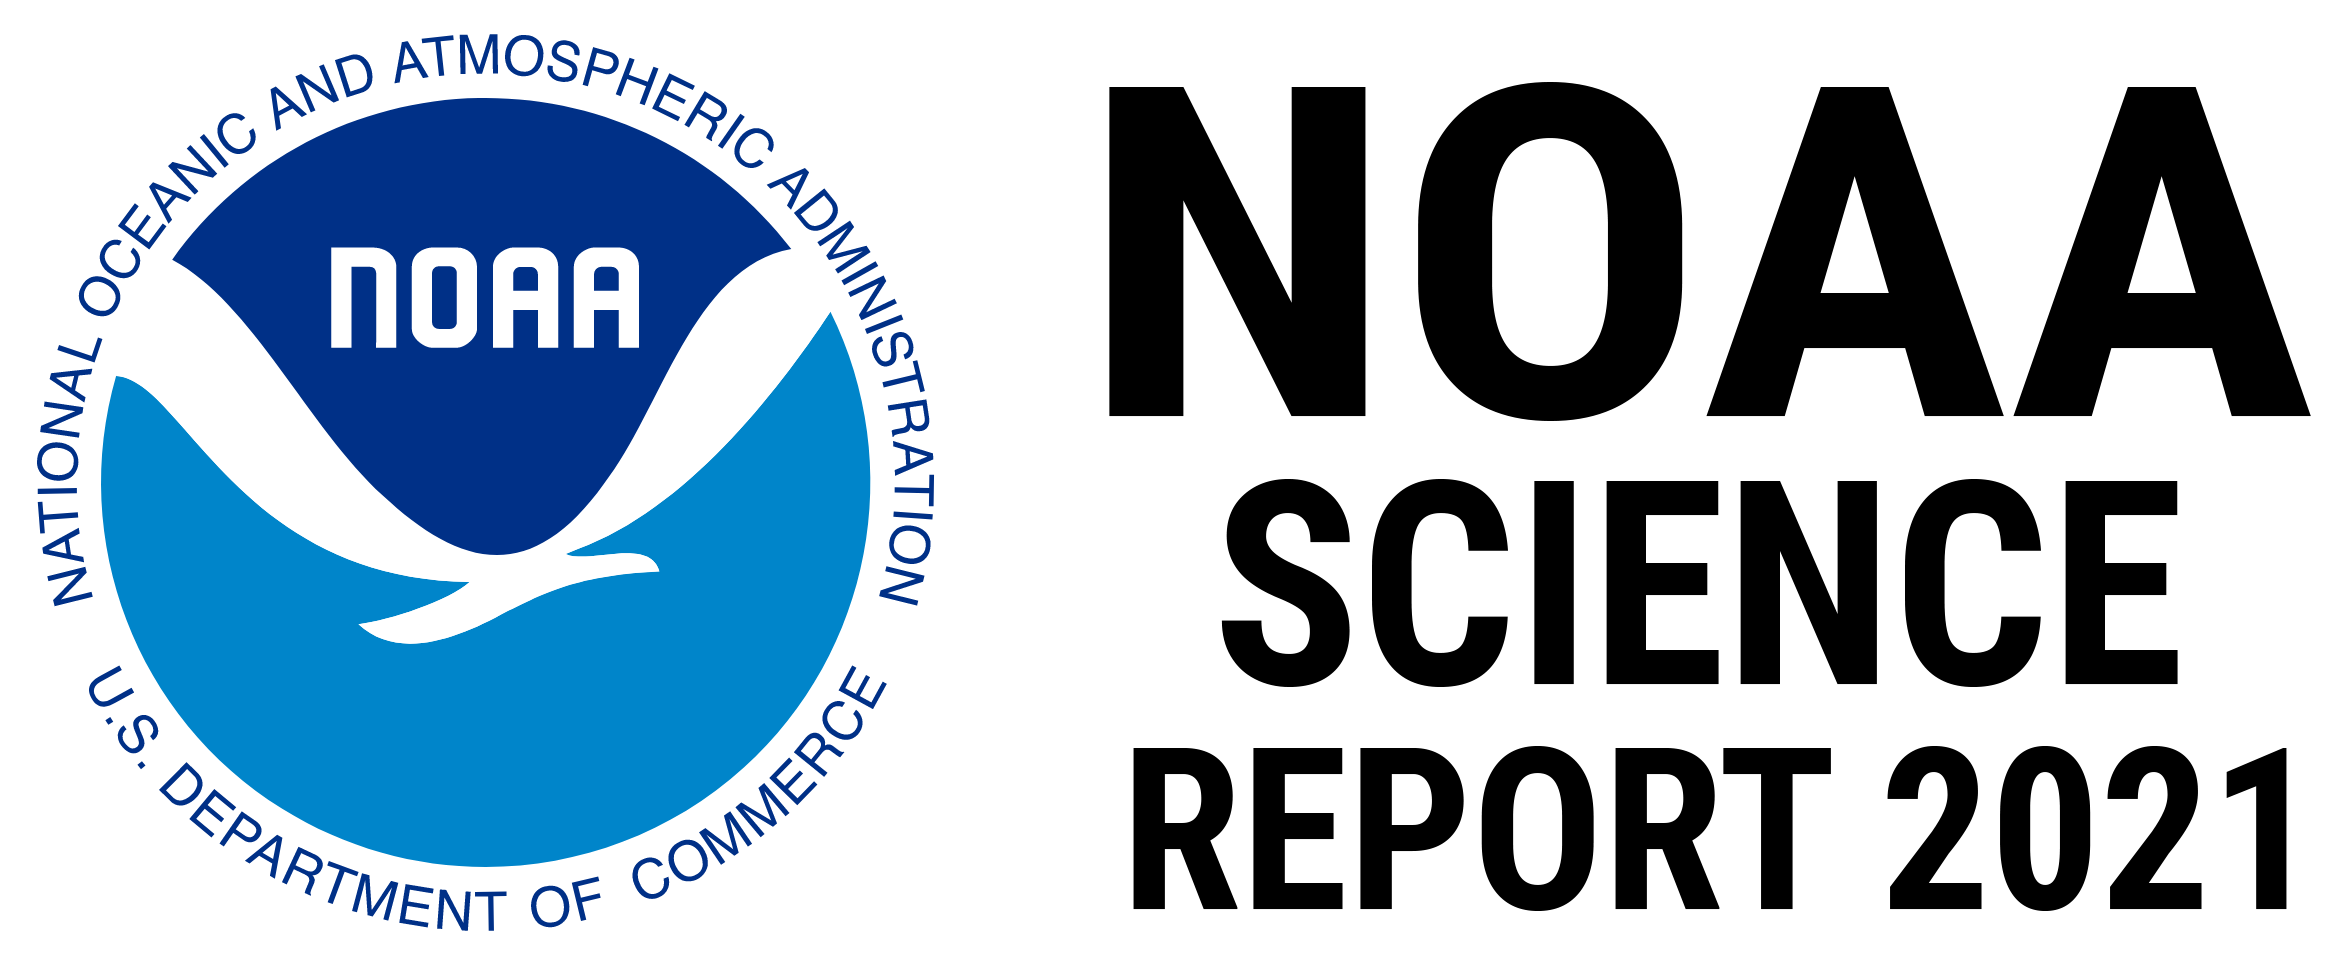 NOAA Science Report Seminar: A Robust and Effective Research, Development, and Transition Enterprise